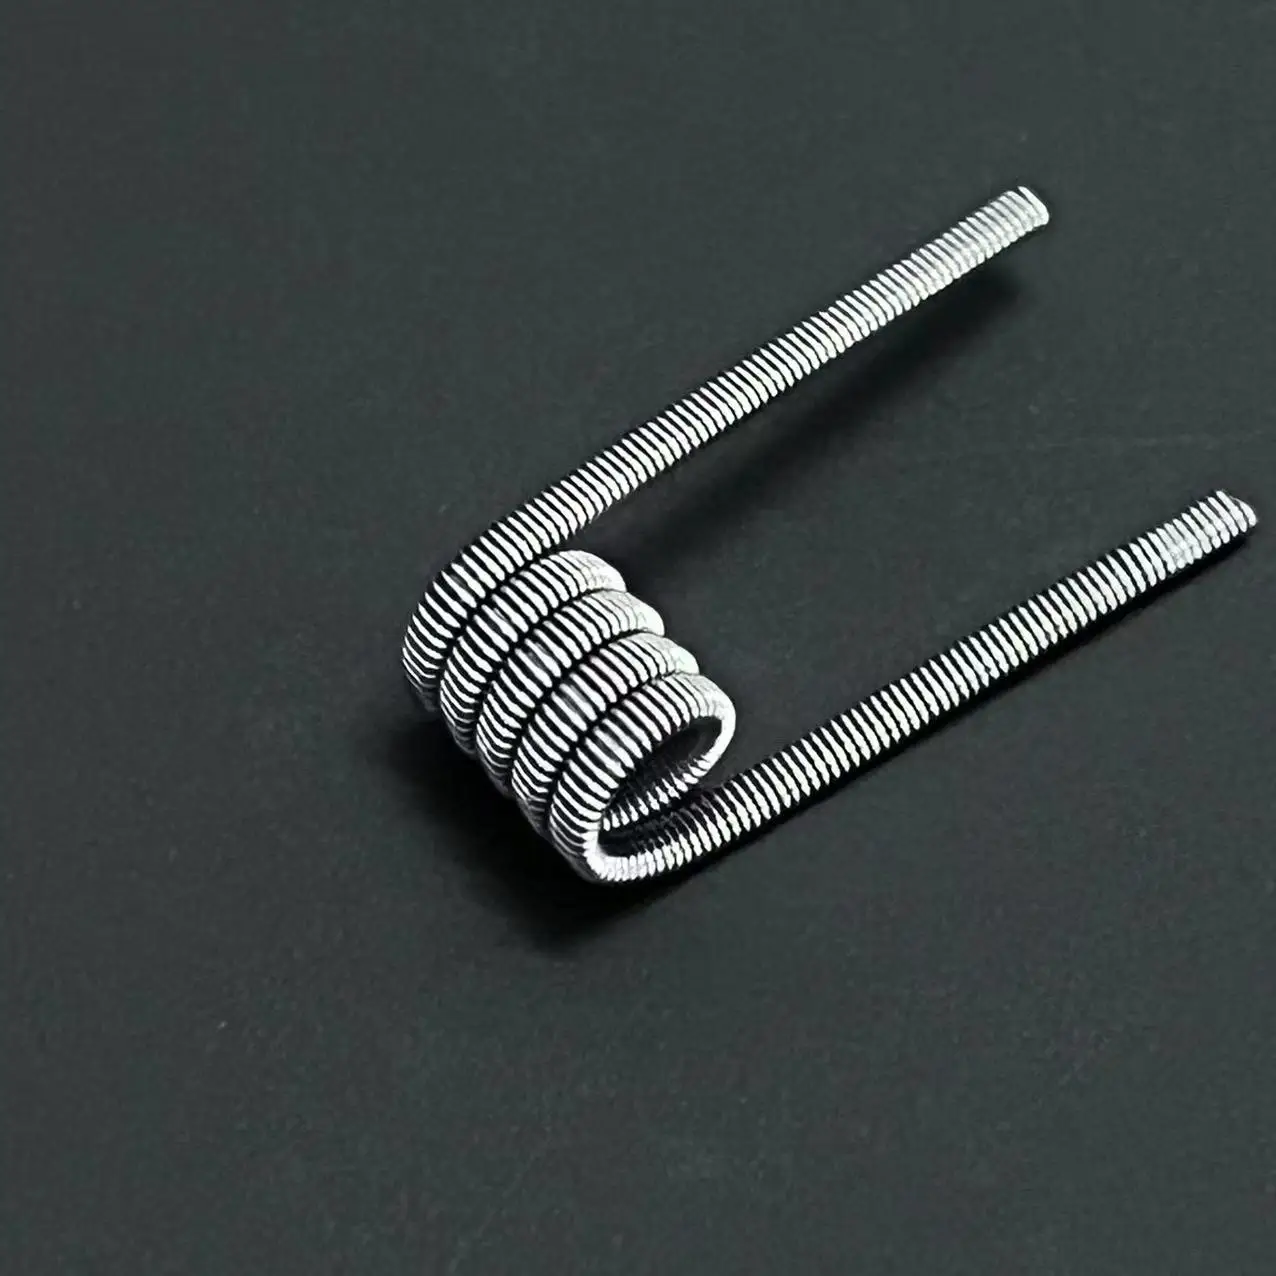 DL RDL 3mm Spiral ID PreBuilt Fused Clapton Coils Alien Twisted Resistance Coil KA1/A1/SS316L/NI80 Heating Wire Disassembly Tool